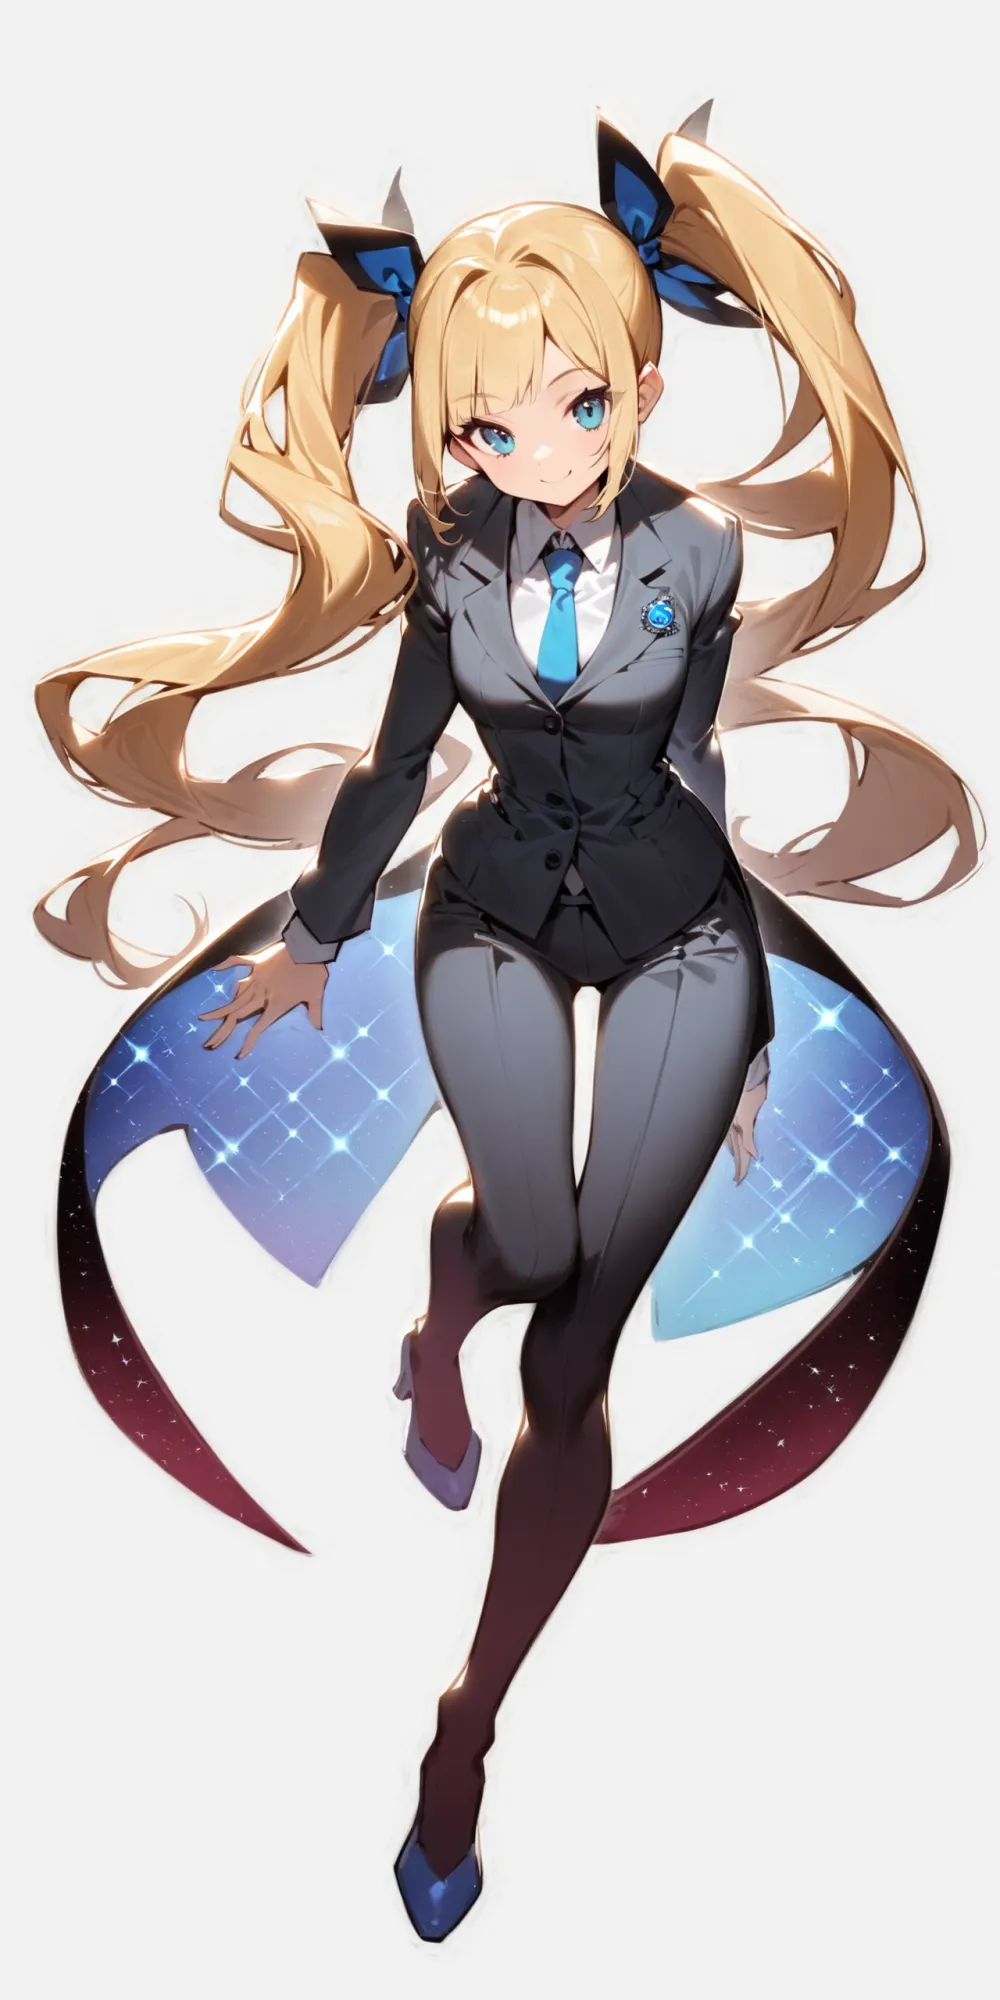 '1girl, business suit, blonde hair, twintails,\nsmile, closed mouth,\ntachi-e, fullbody, white background,\nAlice in glitterworld\nNegative prompt: (worst quality, low quality:1.4), nsfw\nSteps: 35, Sampler: DPM++ 2M SDE Karras, CFG scale: 7, Seed: 1, Size: 640x1280, Model hash: 642b08ca49, Model: ConfusionXL2.0_fp16_vae, VAE hash: 63aeecb90f, VAE: sdxl_vae_0.9.safetensors, Denoising strength: 0.6, Clip skip: 2, Hires upscale: 2, Hires steps: 15, Hires upscaler: ESRGAN_4x, Eta: 0.68, Version: v1.7.0'